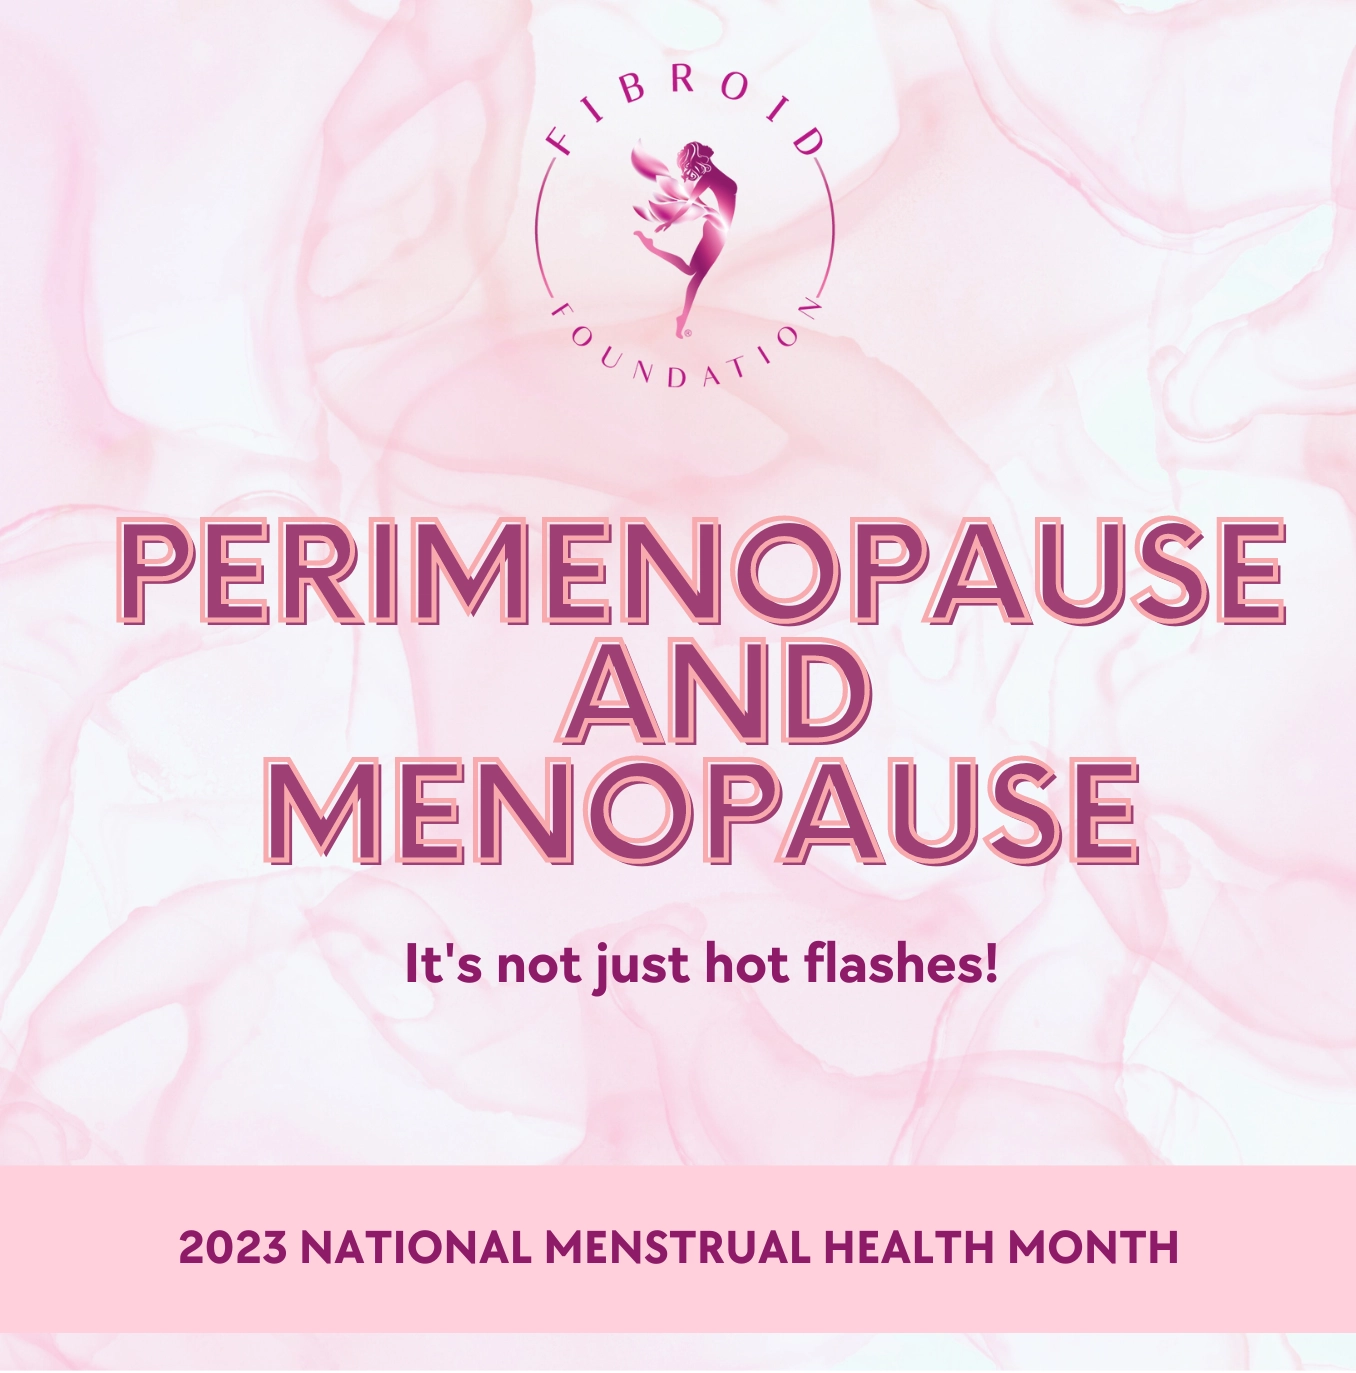 Perimenopause and Menopause Virtual event on May 31 at 7pm EDT | 2023 National Menstrual Health Month